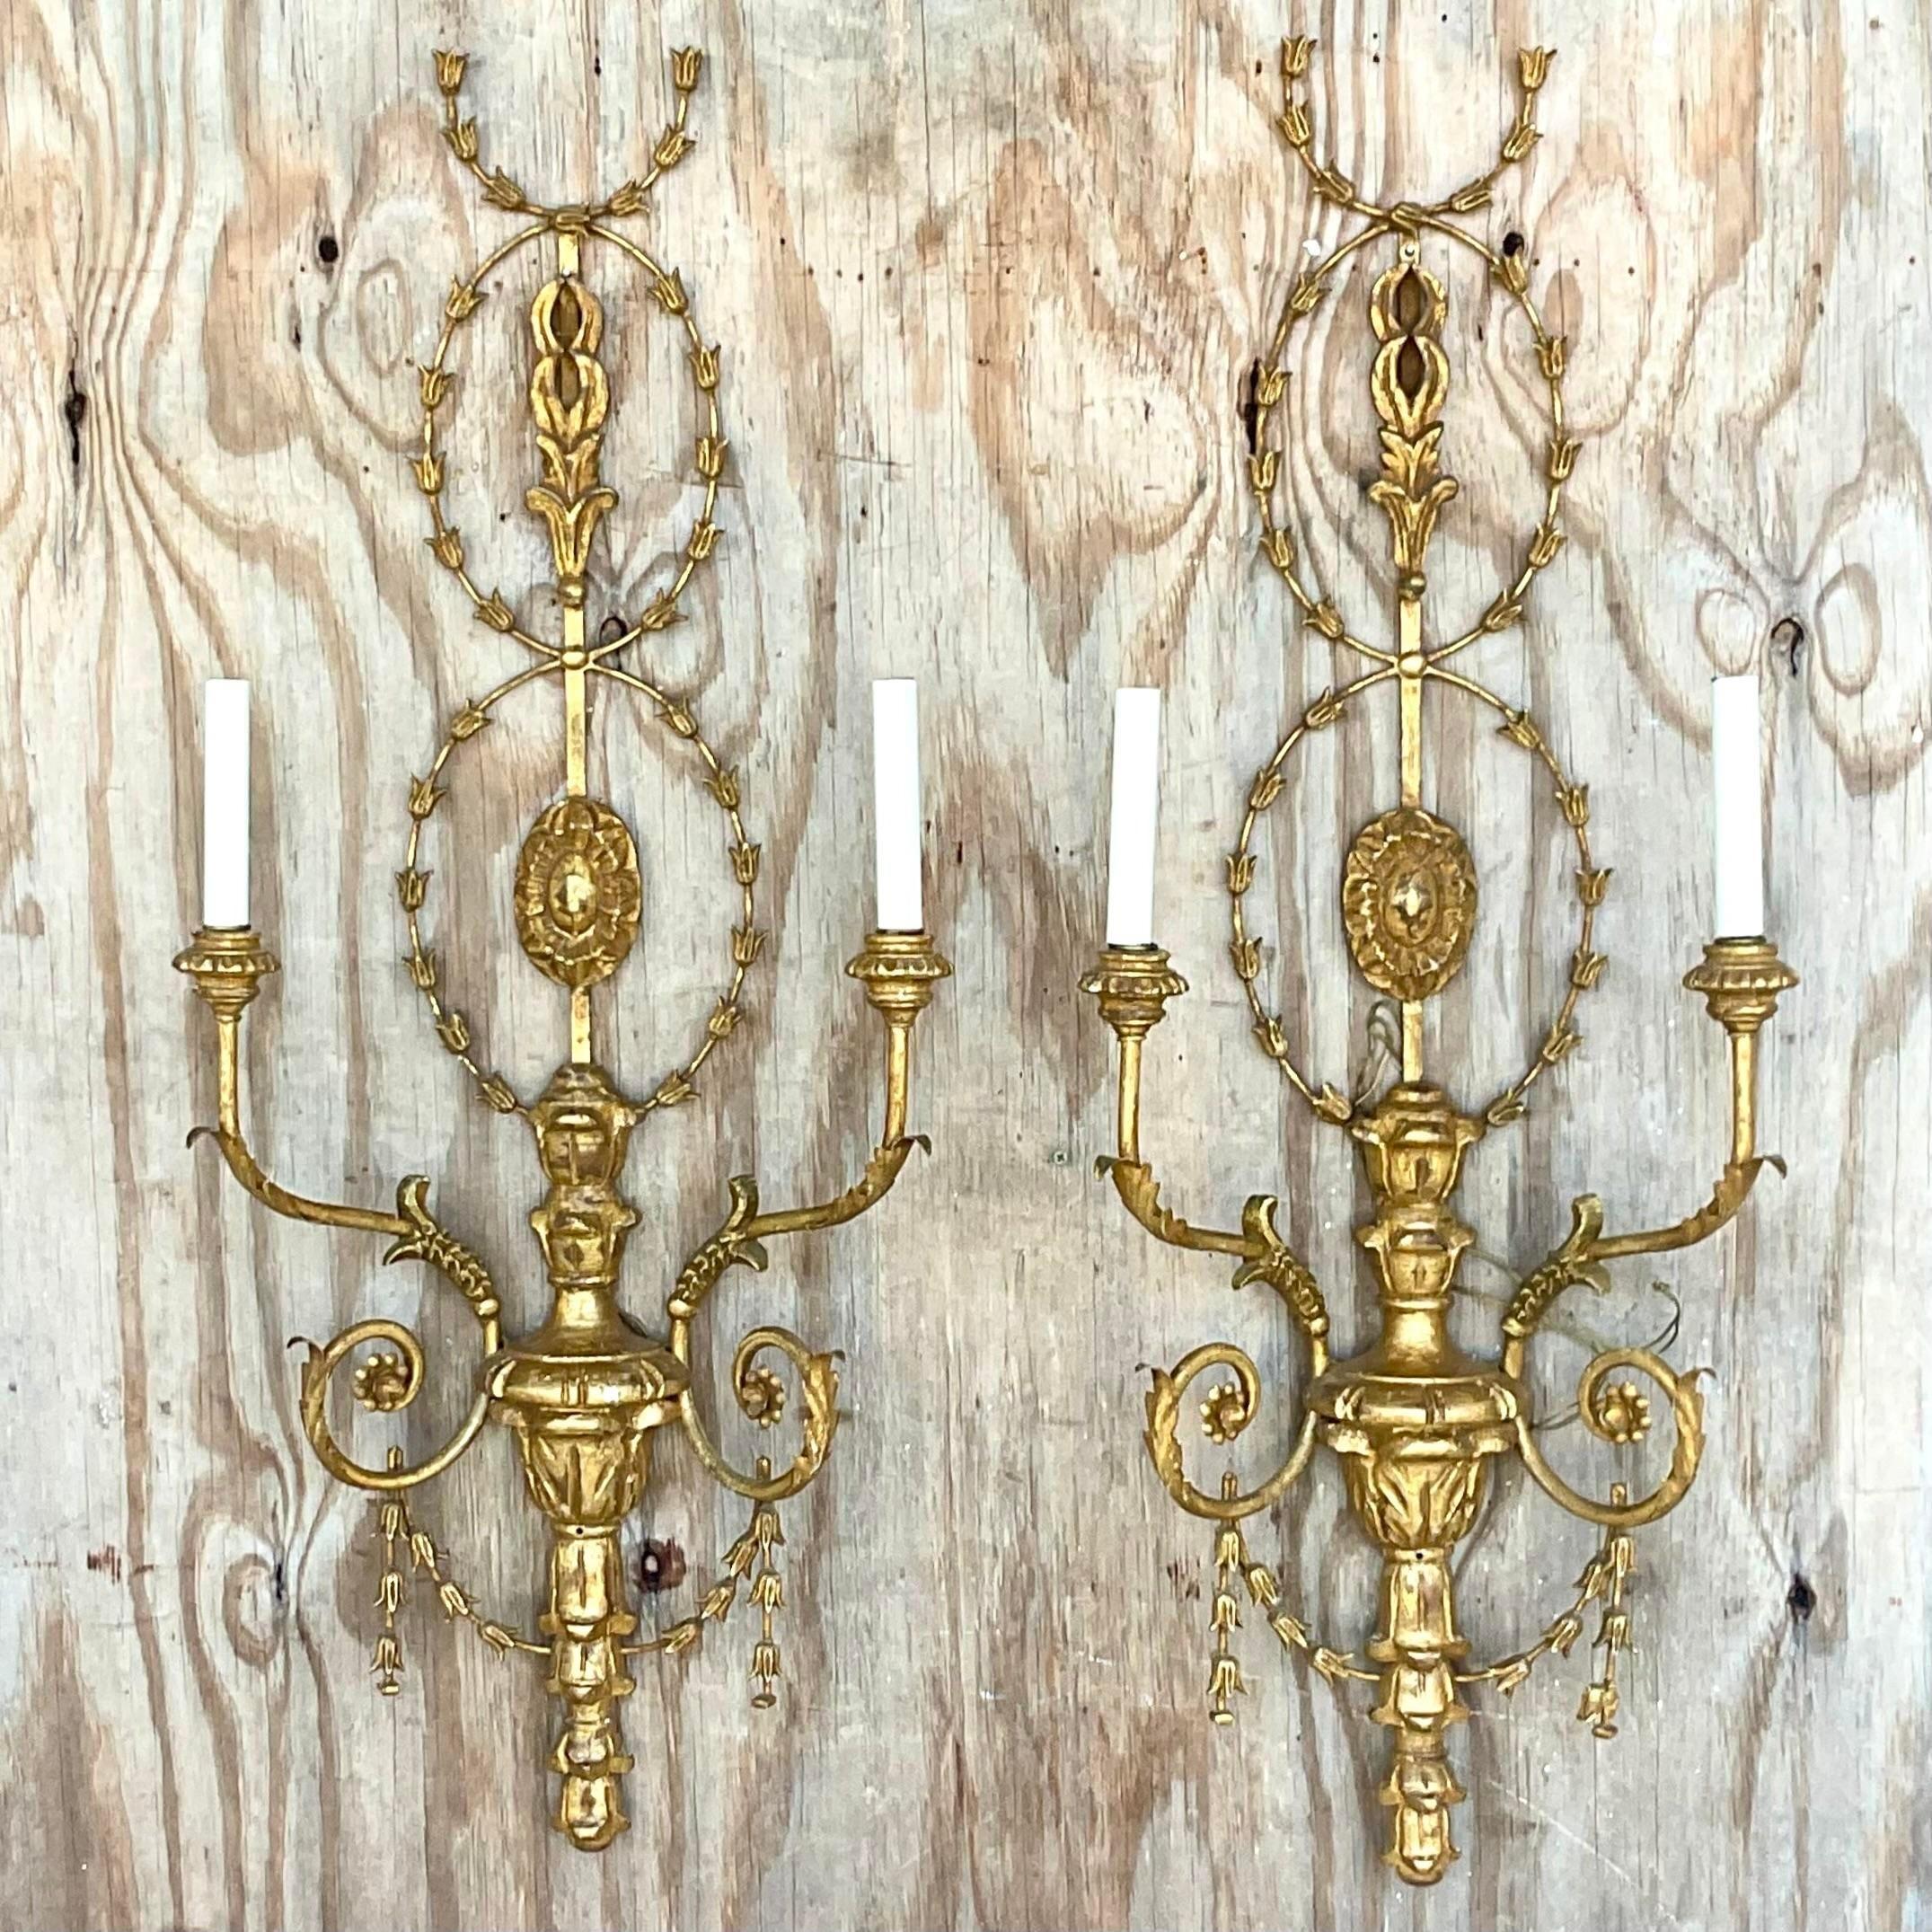 A fantastic pair of vintage Regency wall sconces. Chic gesso over carved wood in a wrapping garland design. Bright gilt finish. Acquired from a Palm Beach estate.